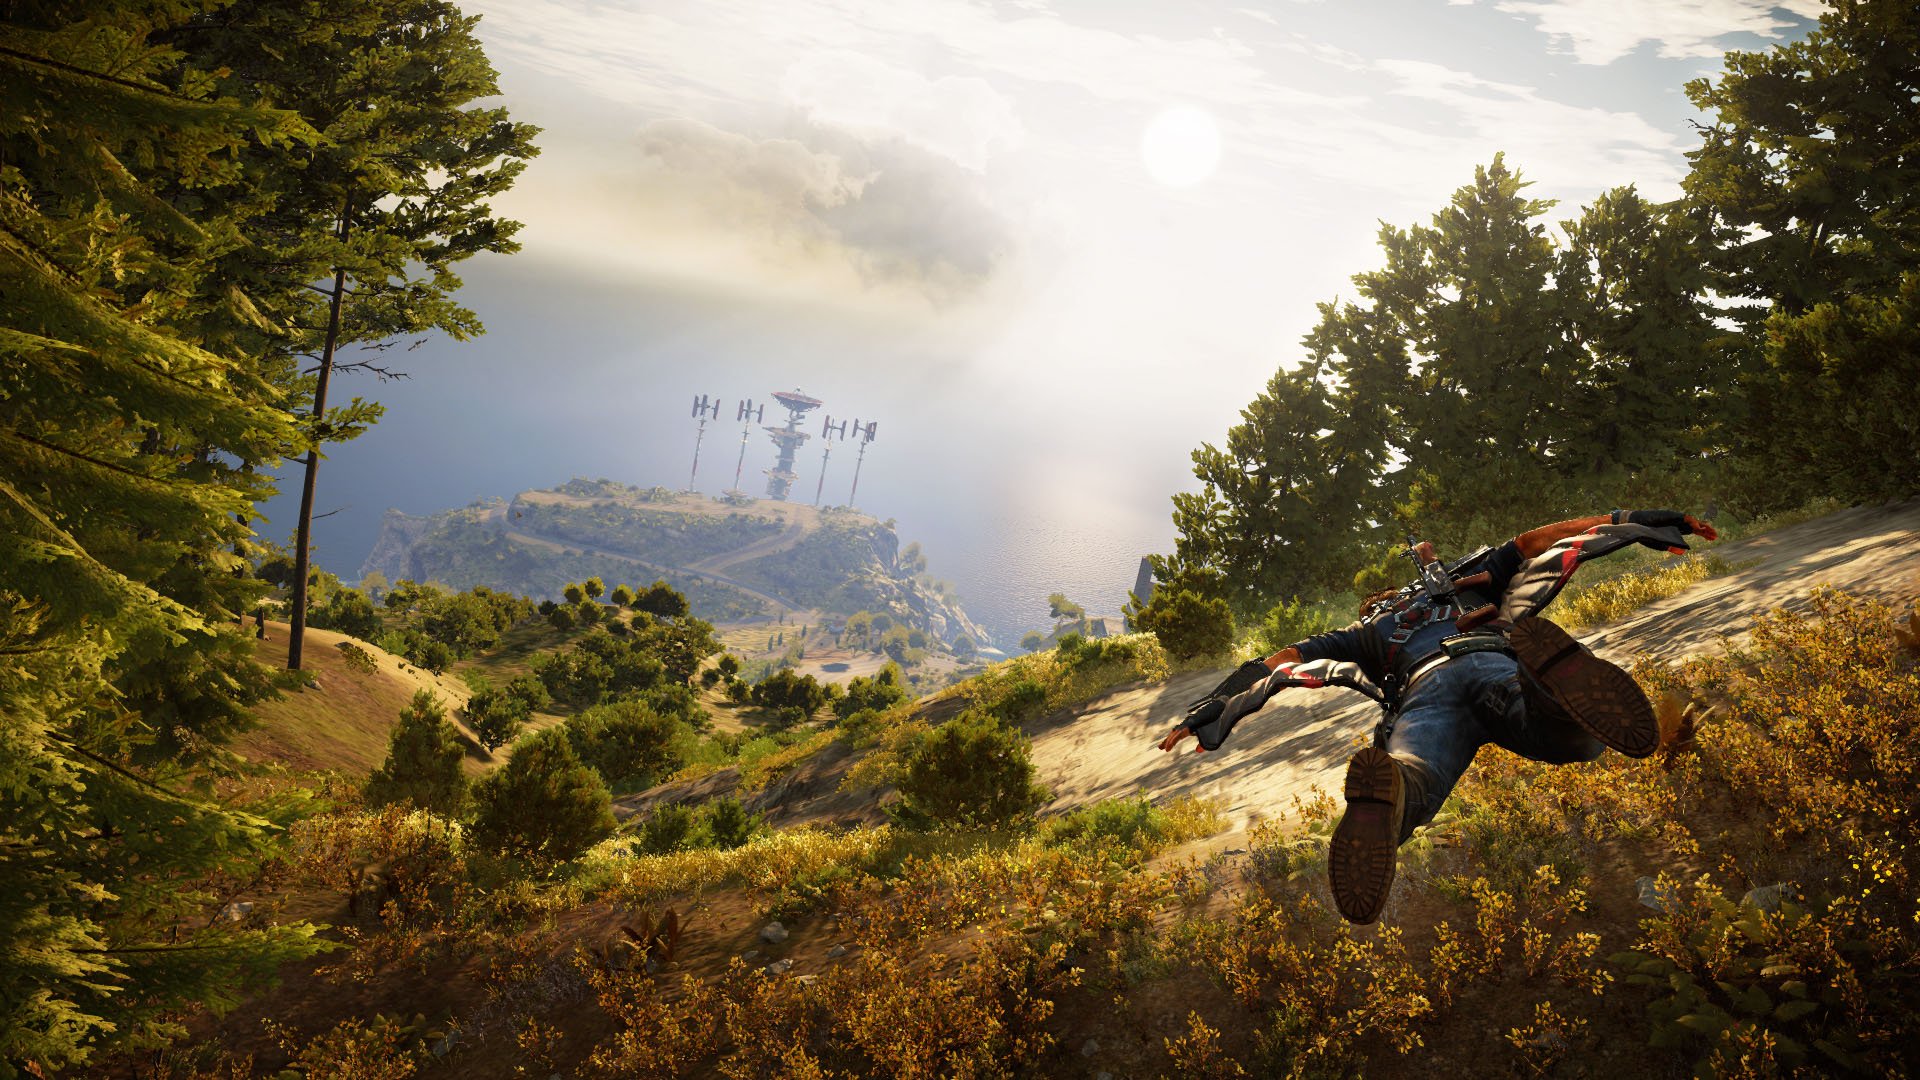 Video Game Just Cause 3 HD Wallpaper by Jesse James Bonelli